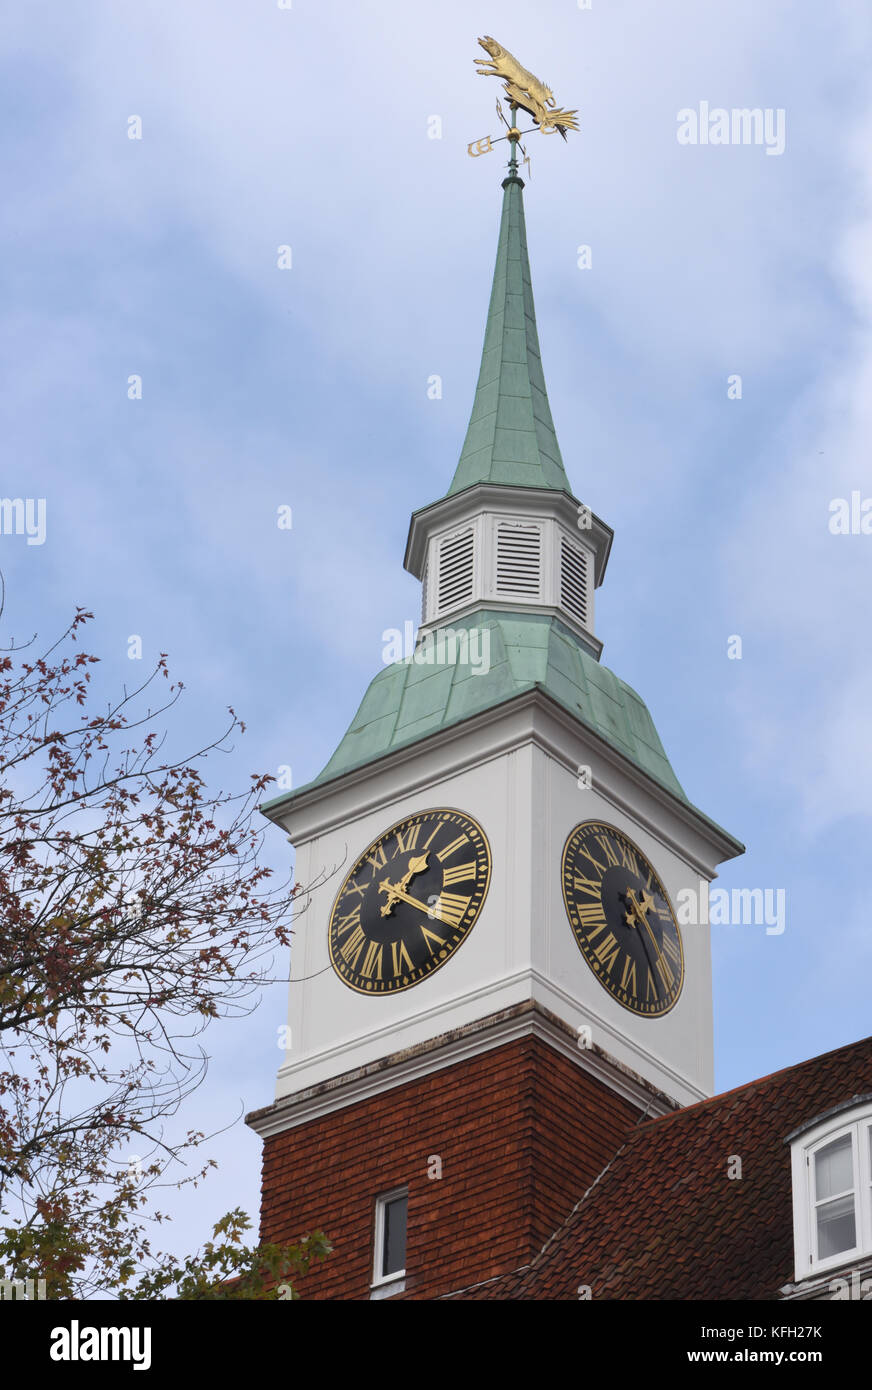 Tower with clock, spire and weather vane above the Hampshire County Council buildings in Winchester. Winchester, Hampshire. Stock Photo